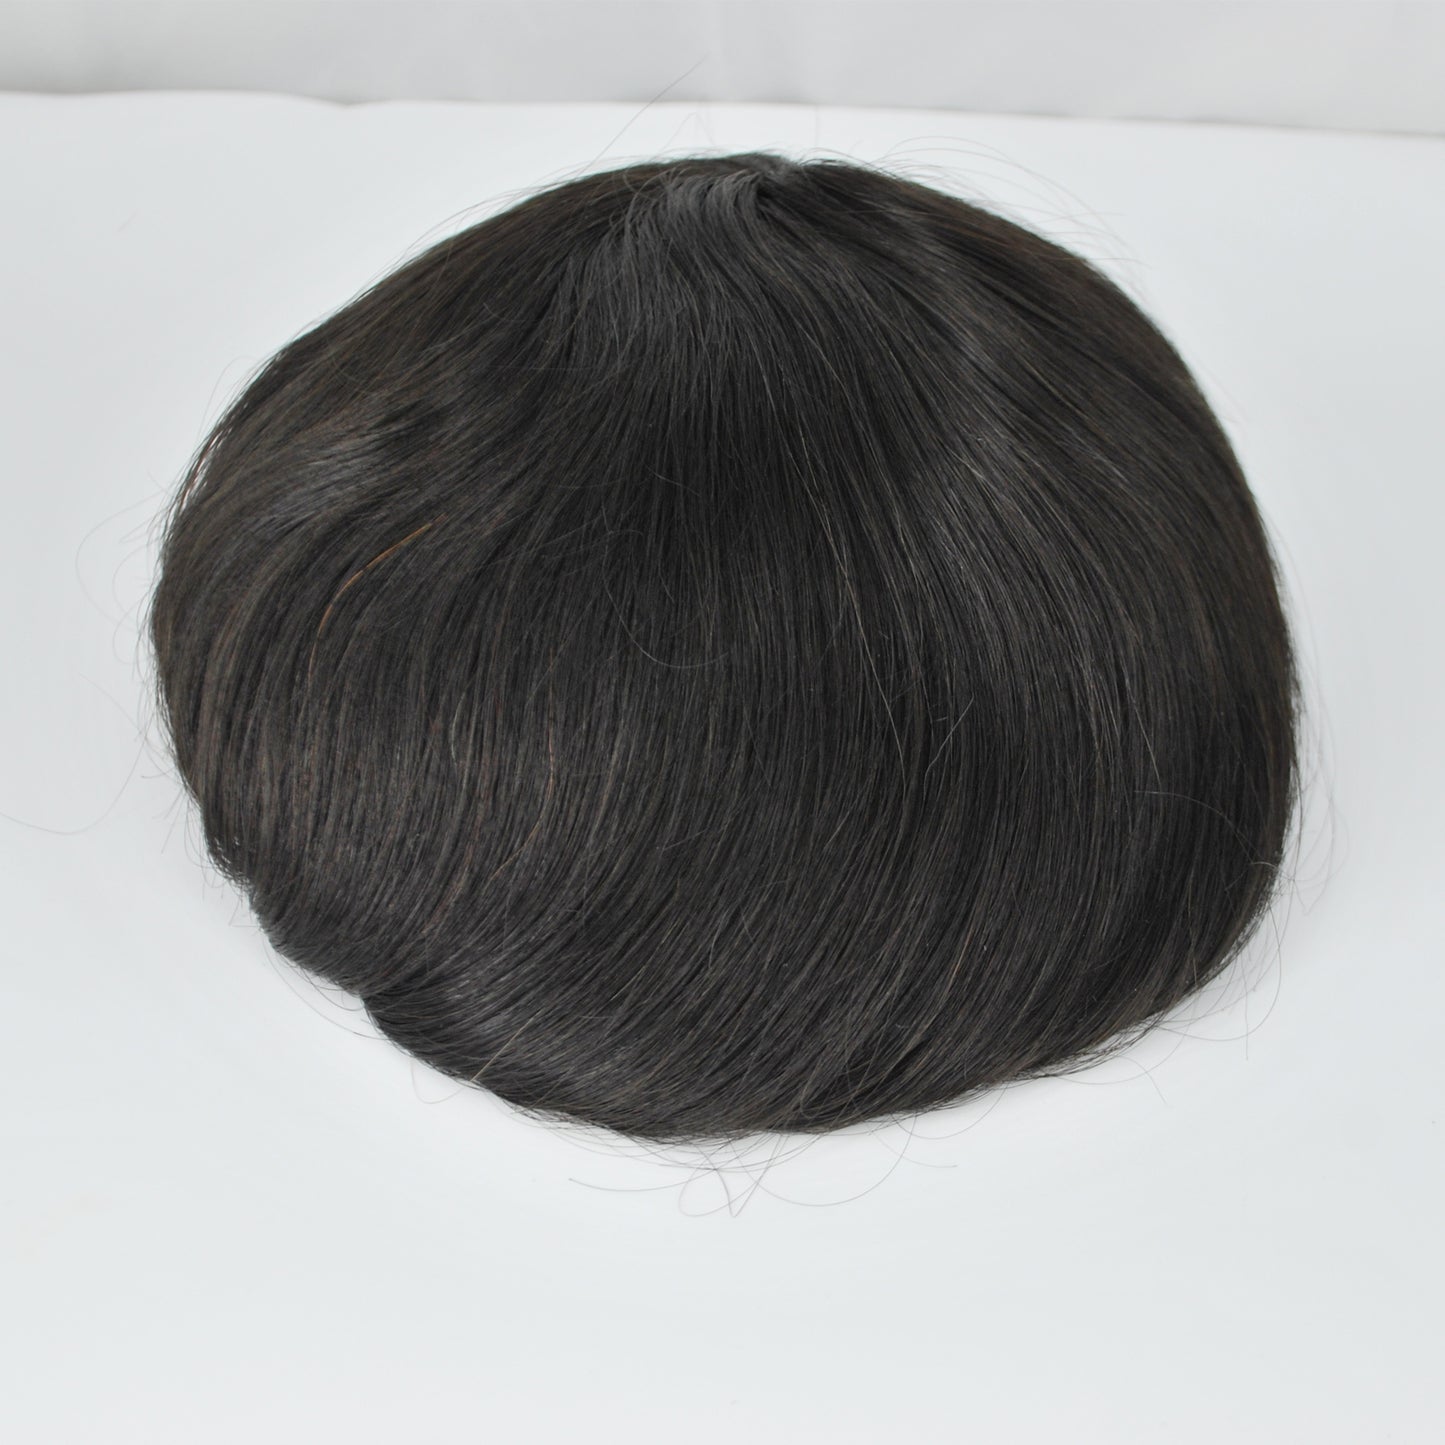 Clearance toupee #1b natural black French lace hair system 10x7.5" men hairpiece full lace